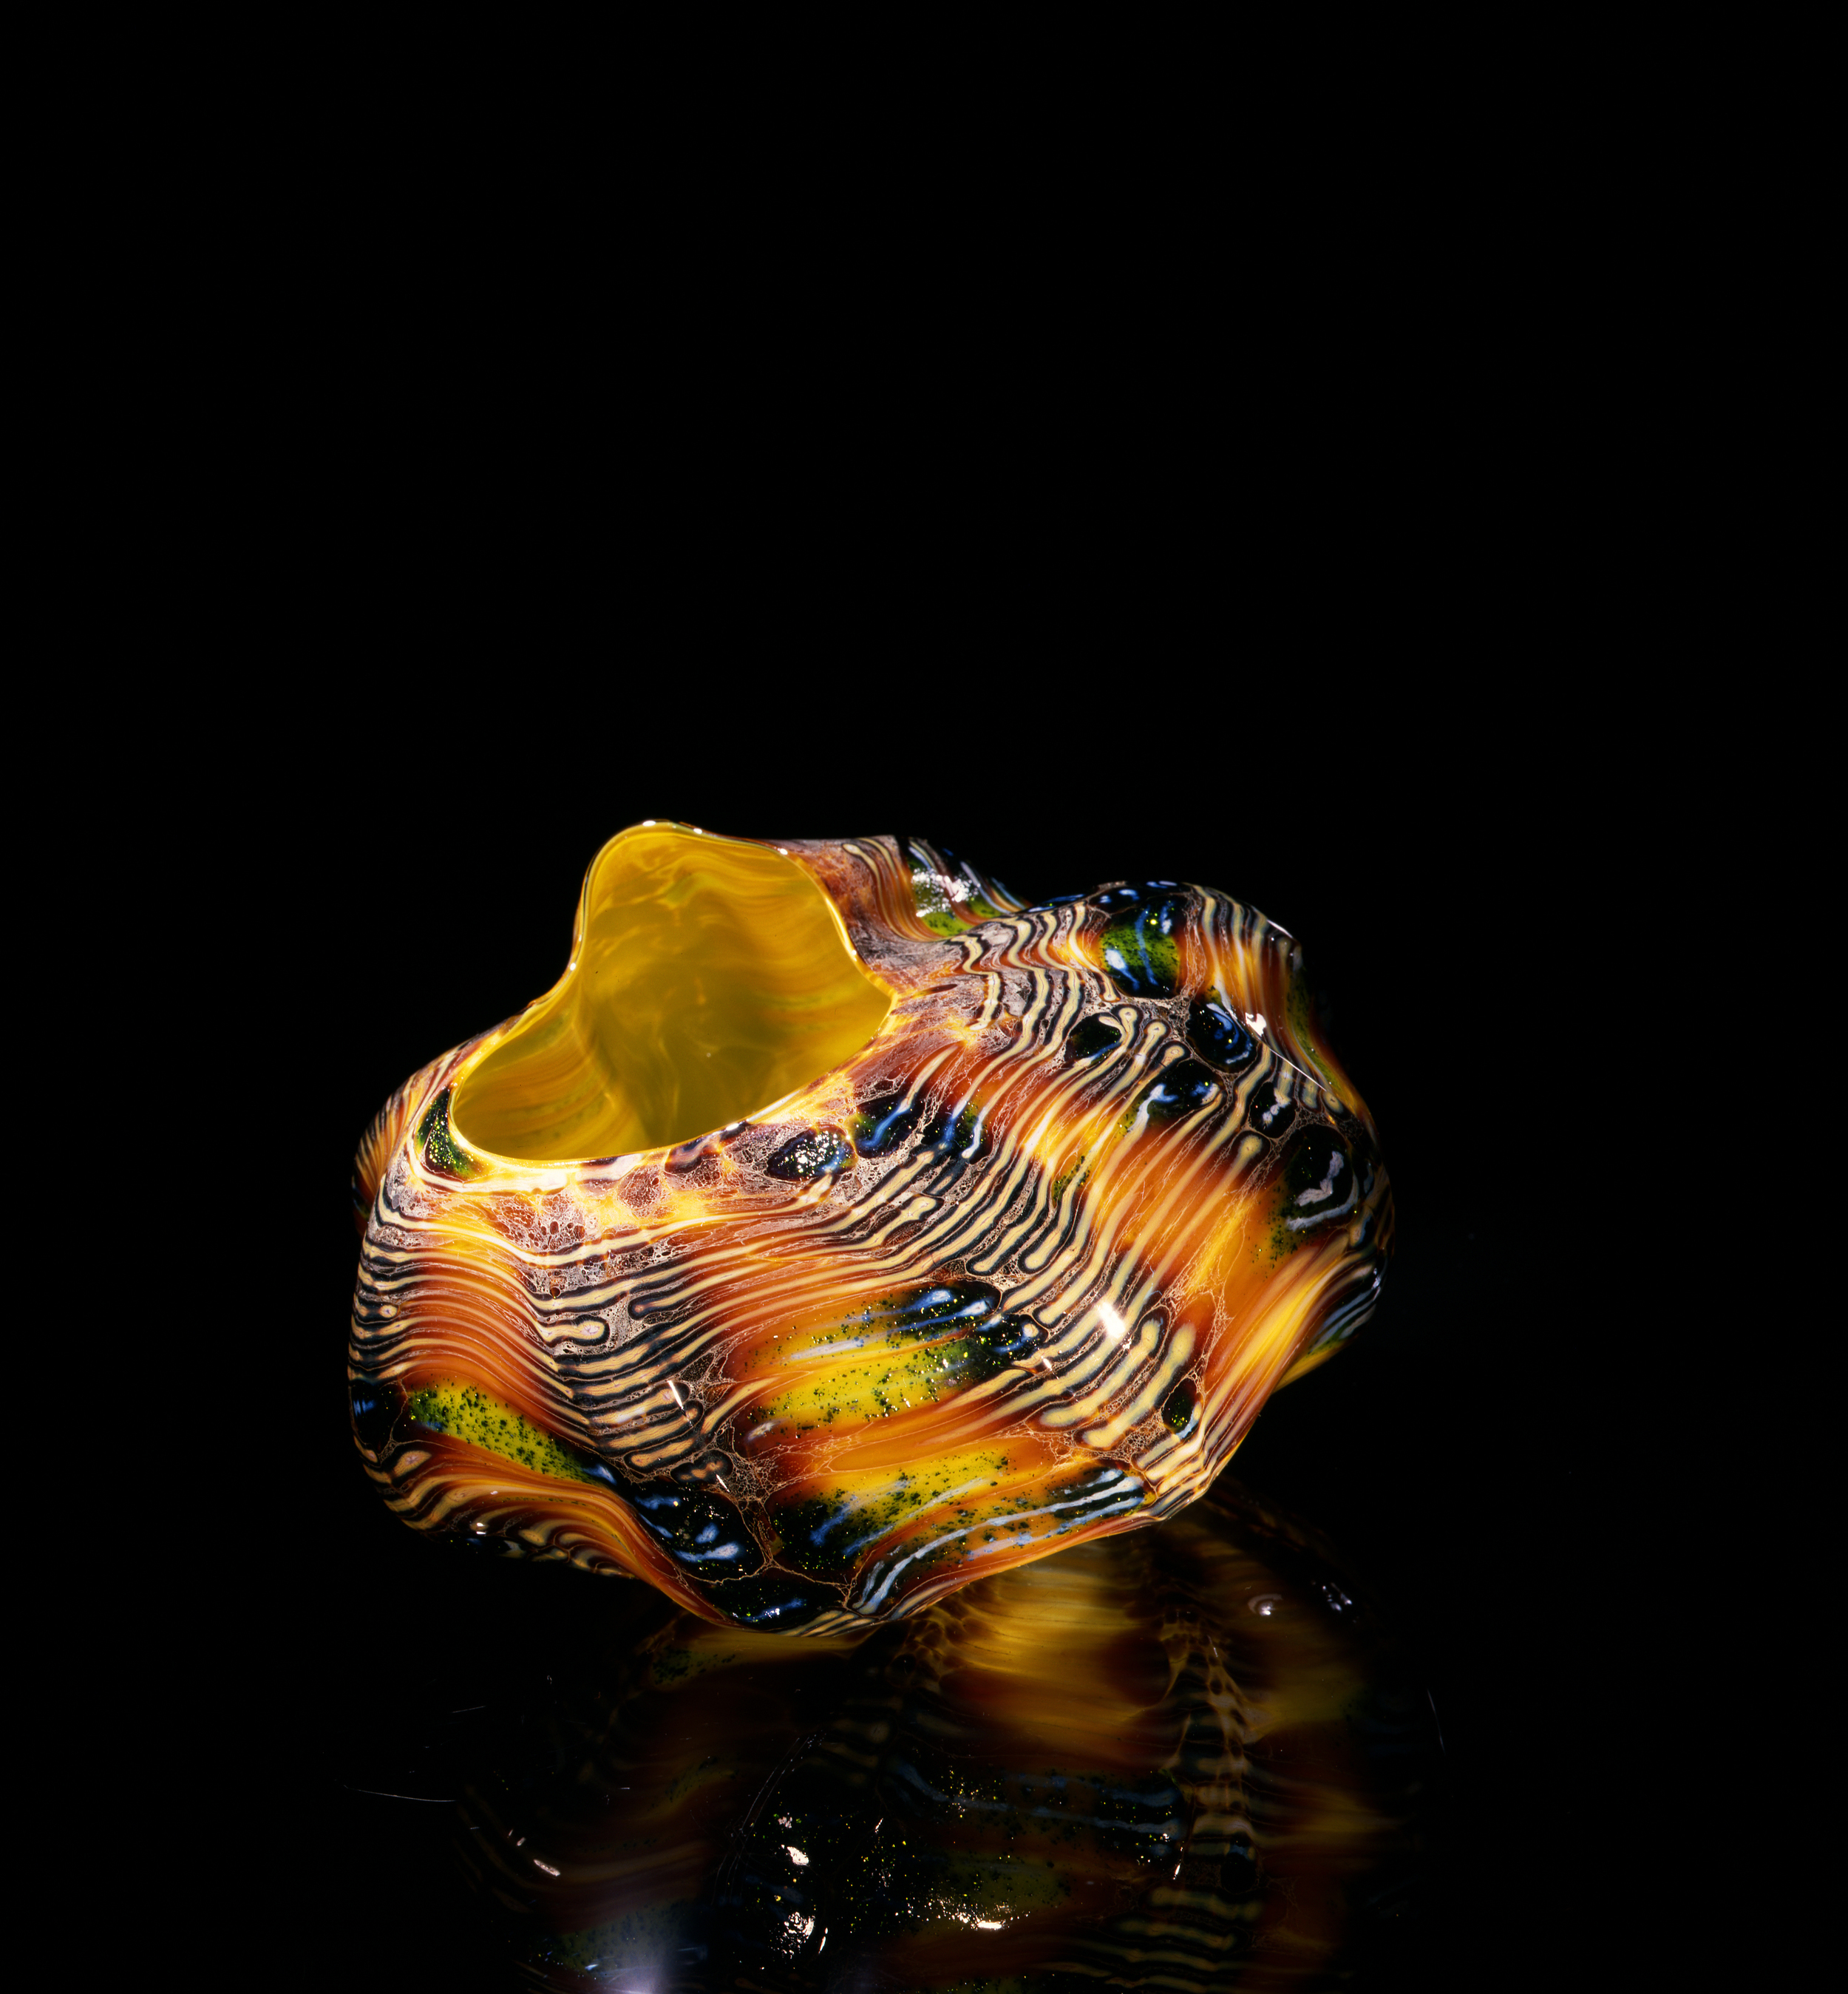  Dale Chihuly,&nbsp; Cadmium Yellow Macchia with Oxblood and Cobalt Patterns&nbsp; (1982, glass, 4 x 6 x 6&nbsp;inches), DC.59 